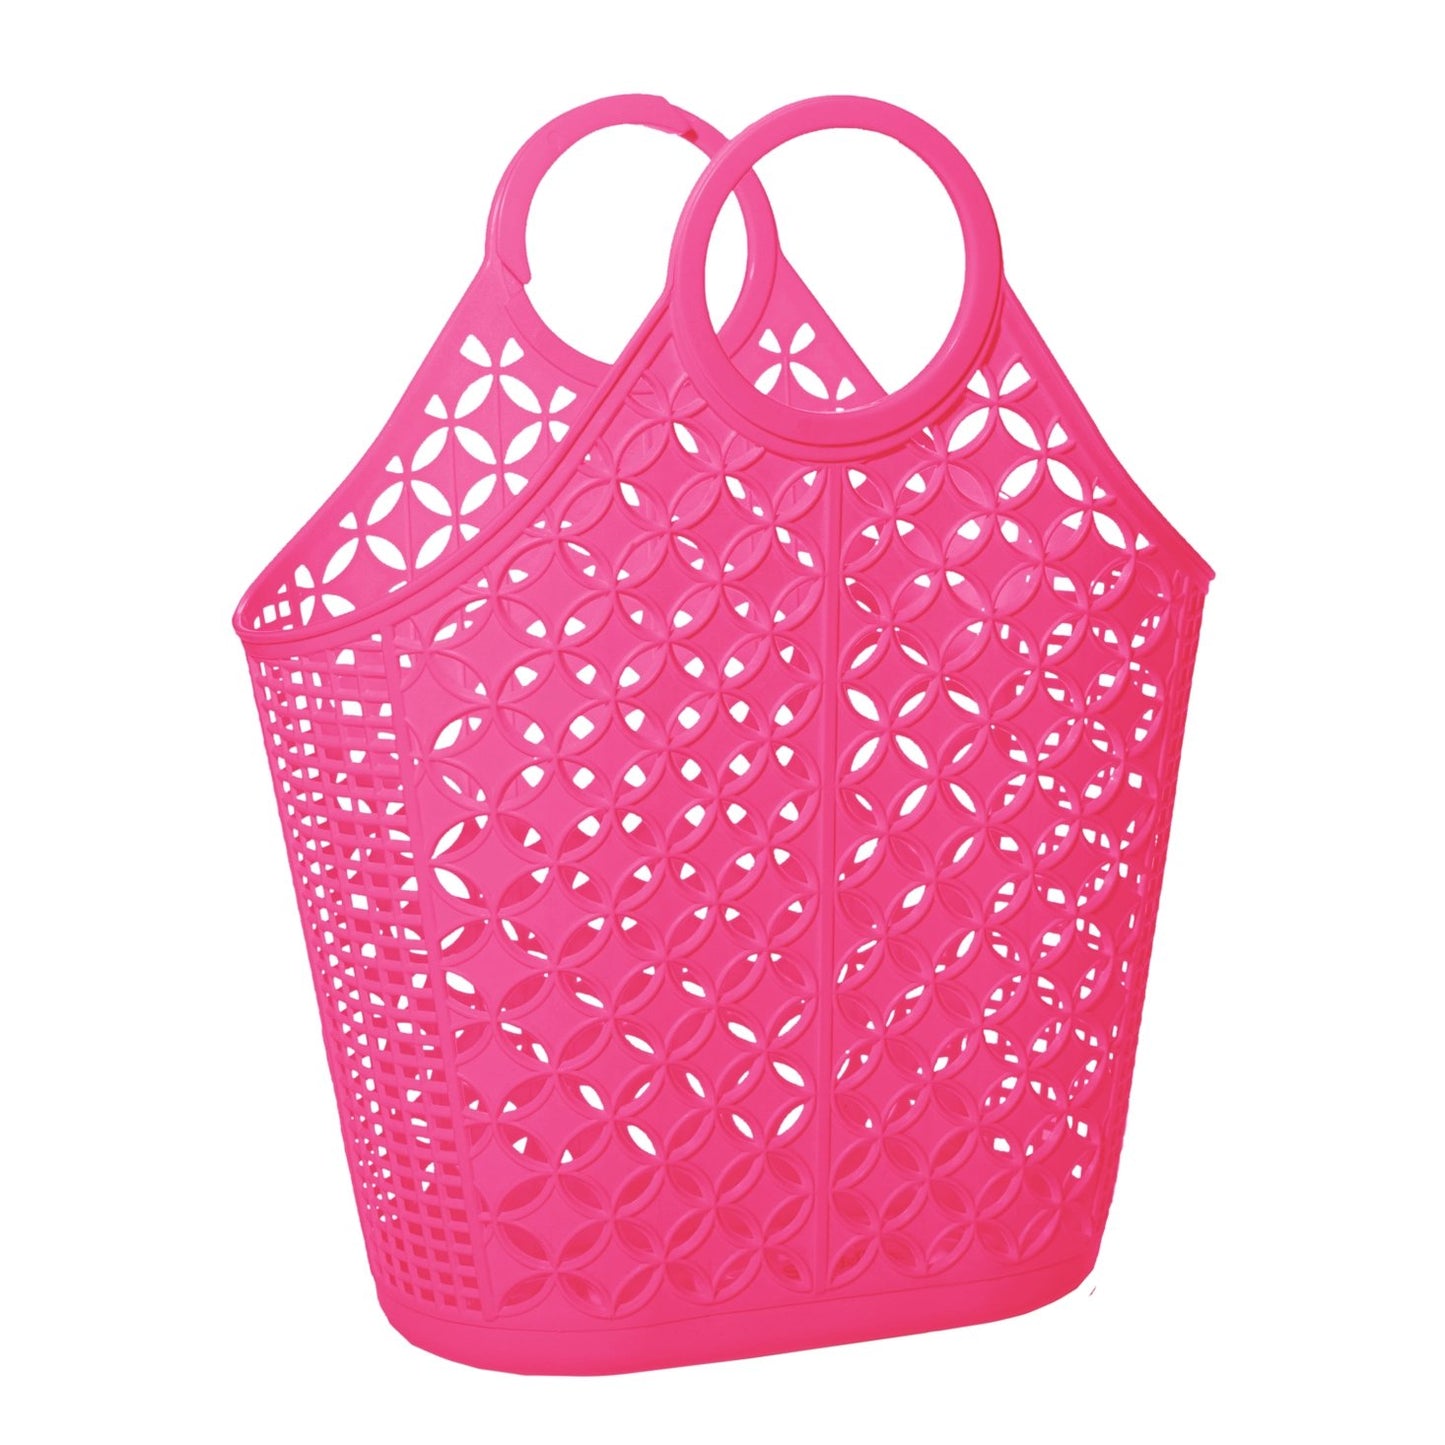 Atomic Tote Jelly Basket